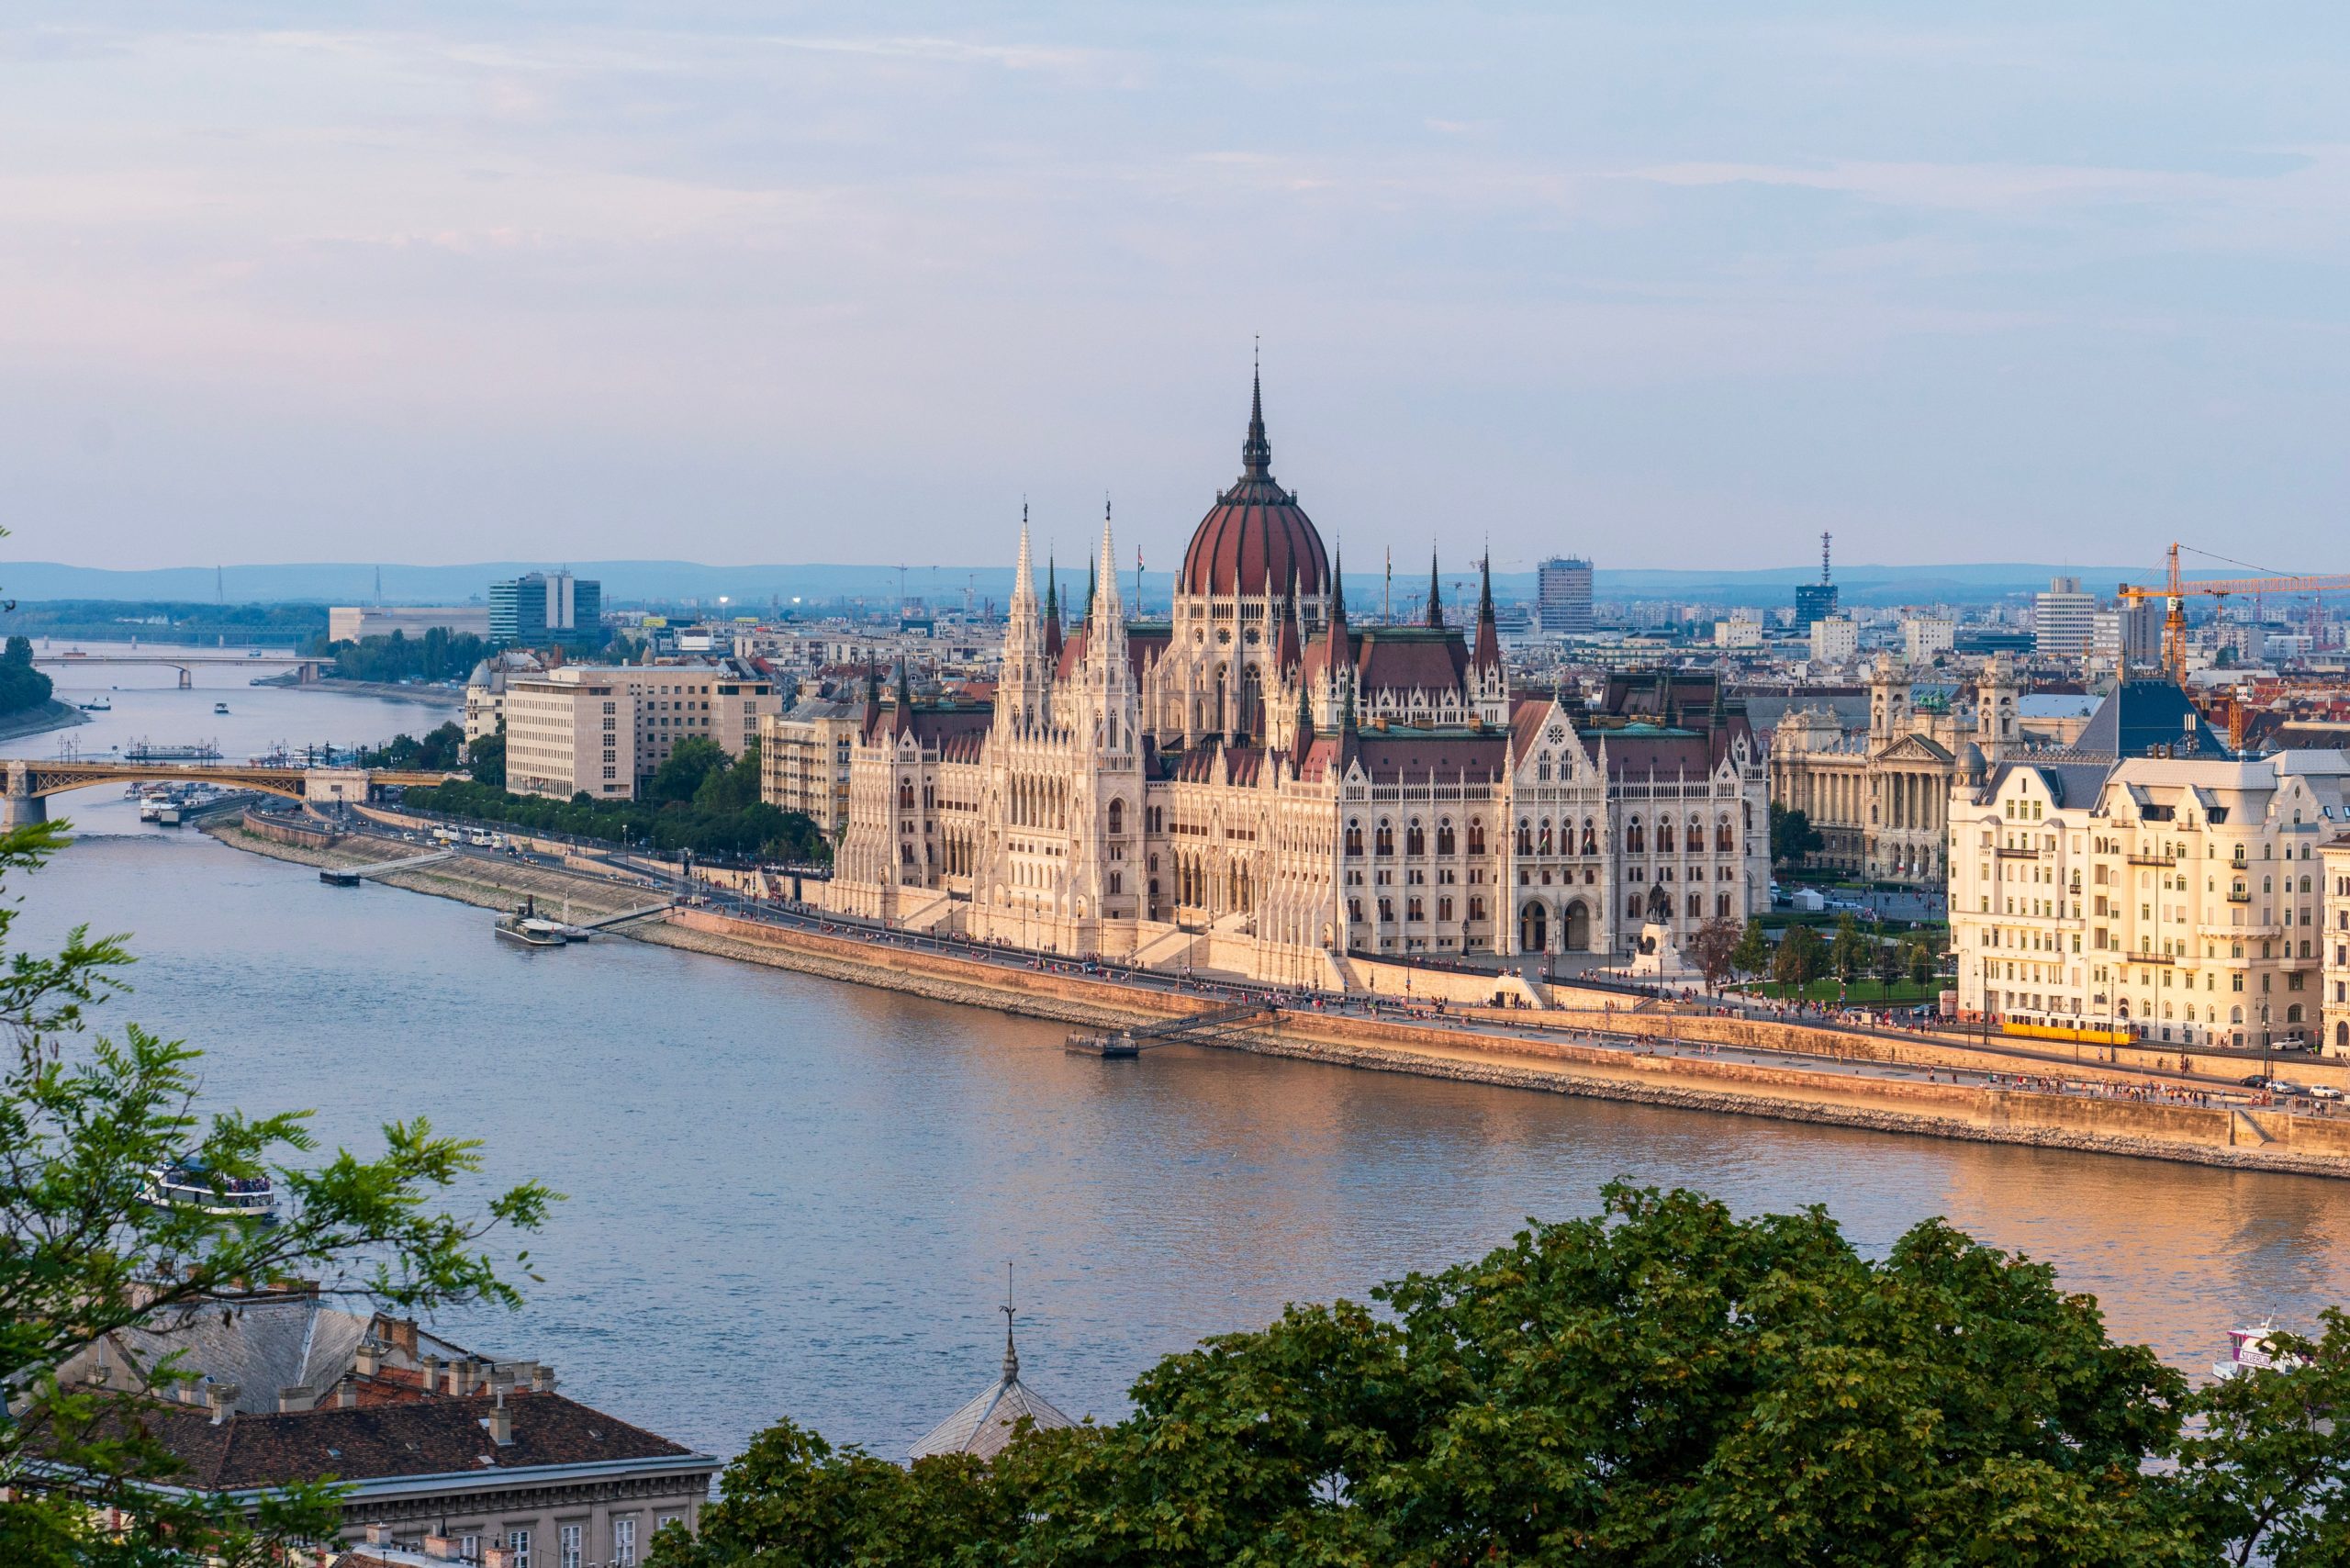 Hungary: Welcomed and unchecked Chinese presence in academia